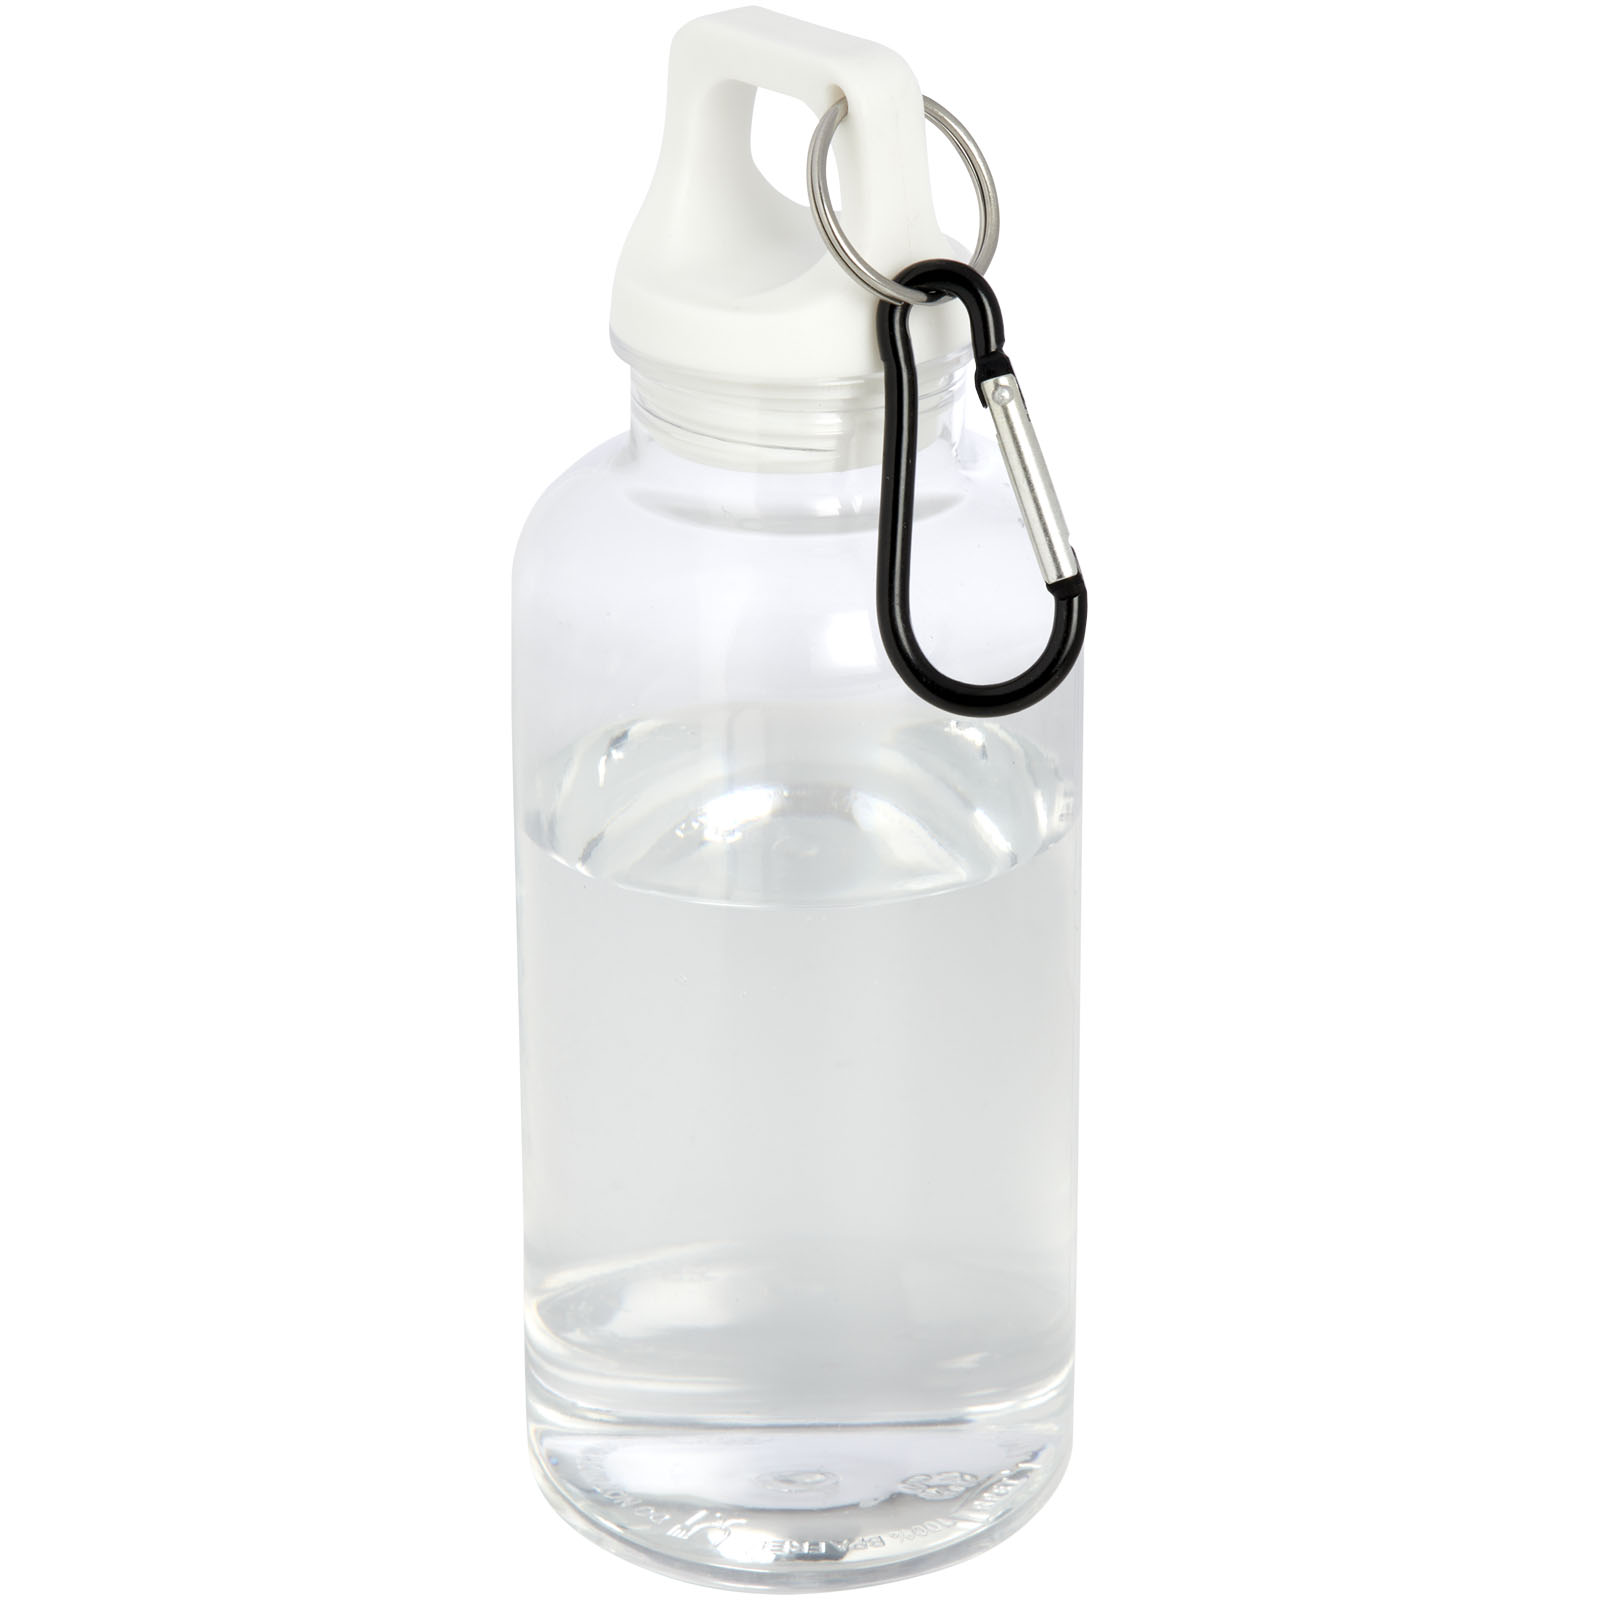 Drinkware - Oregon 400 ml RCS certified recycled plastic water bottle with carabiner